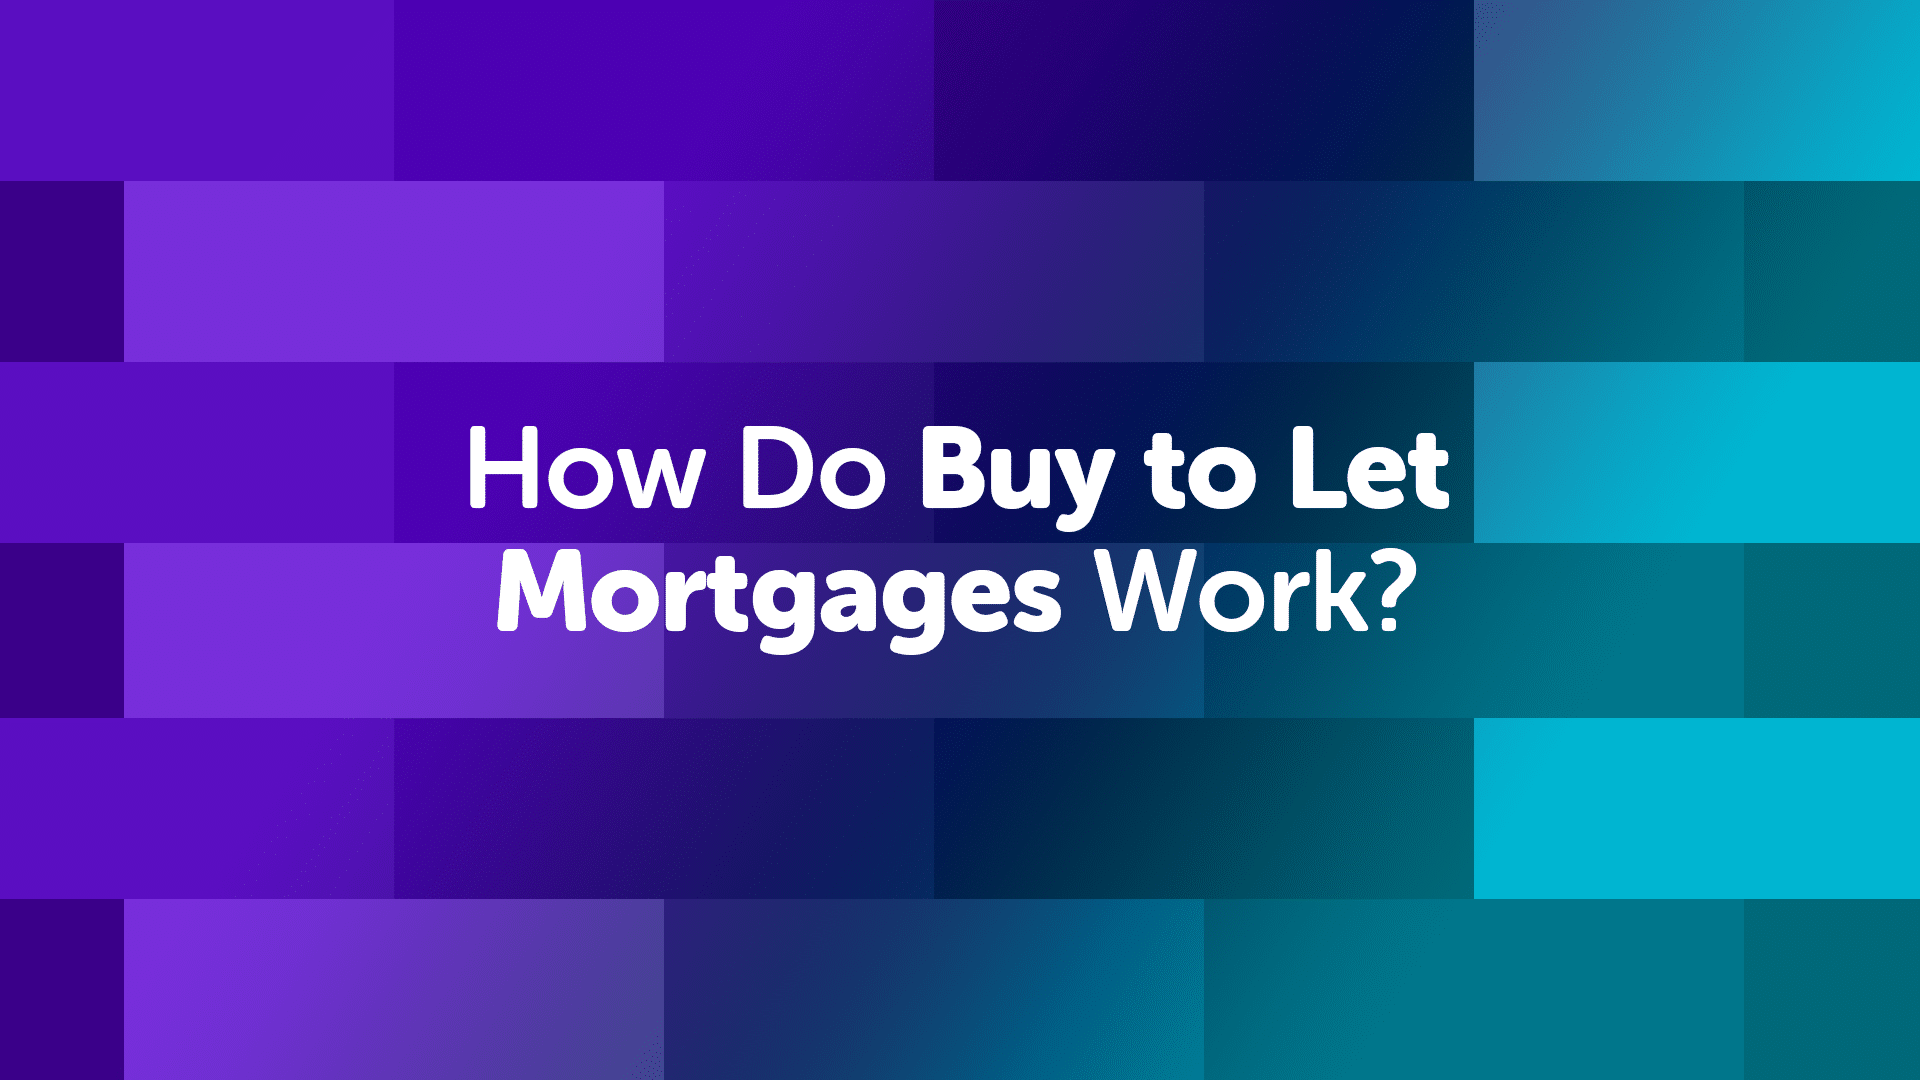 How Do Buy to Let Mortgages in Coventry Work?